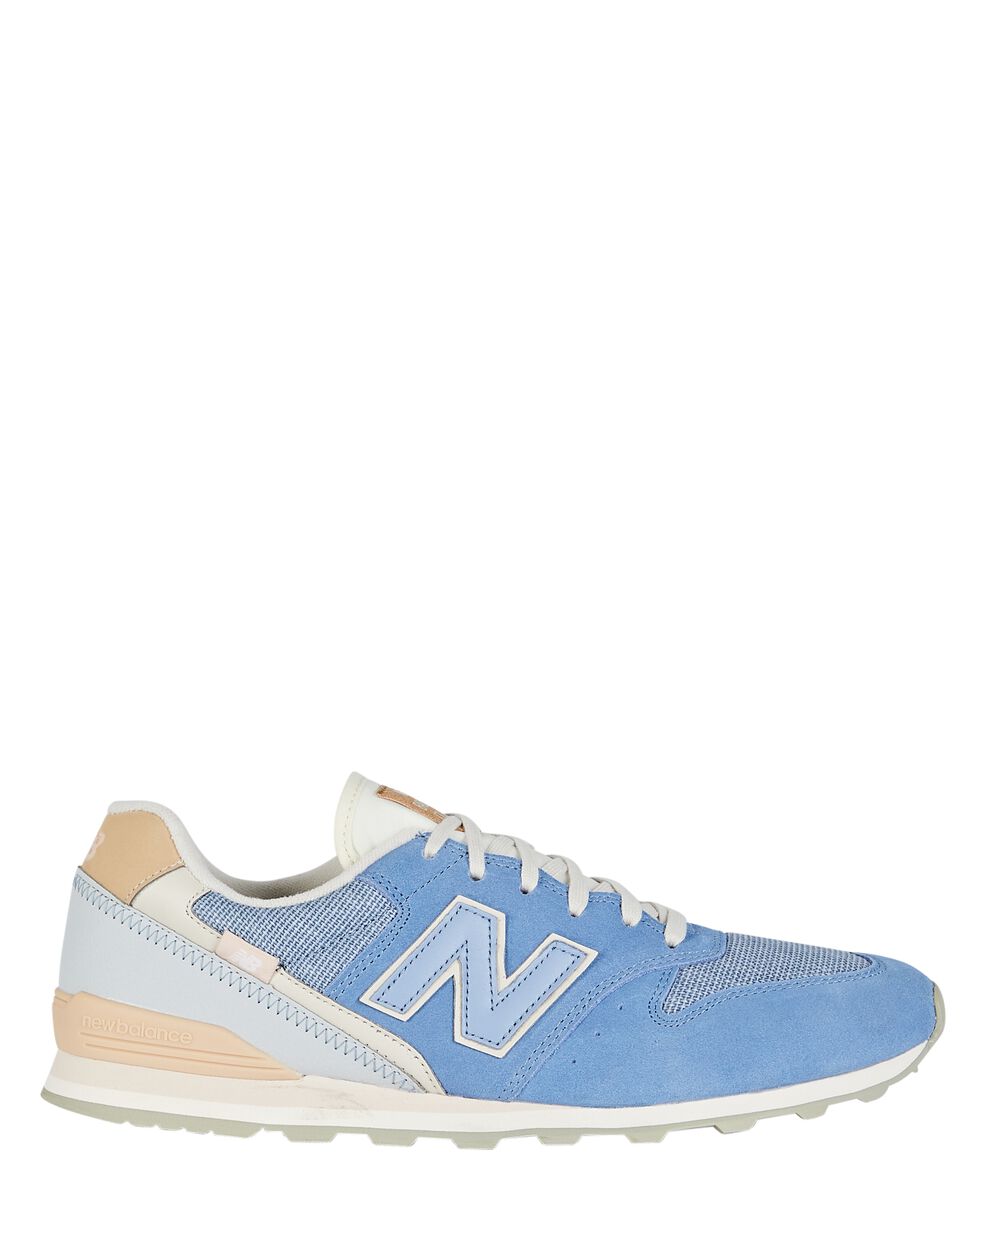 New 996 Classic Sneakers in Blue | INTERMIX®